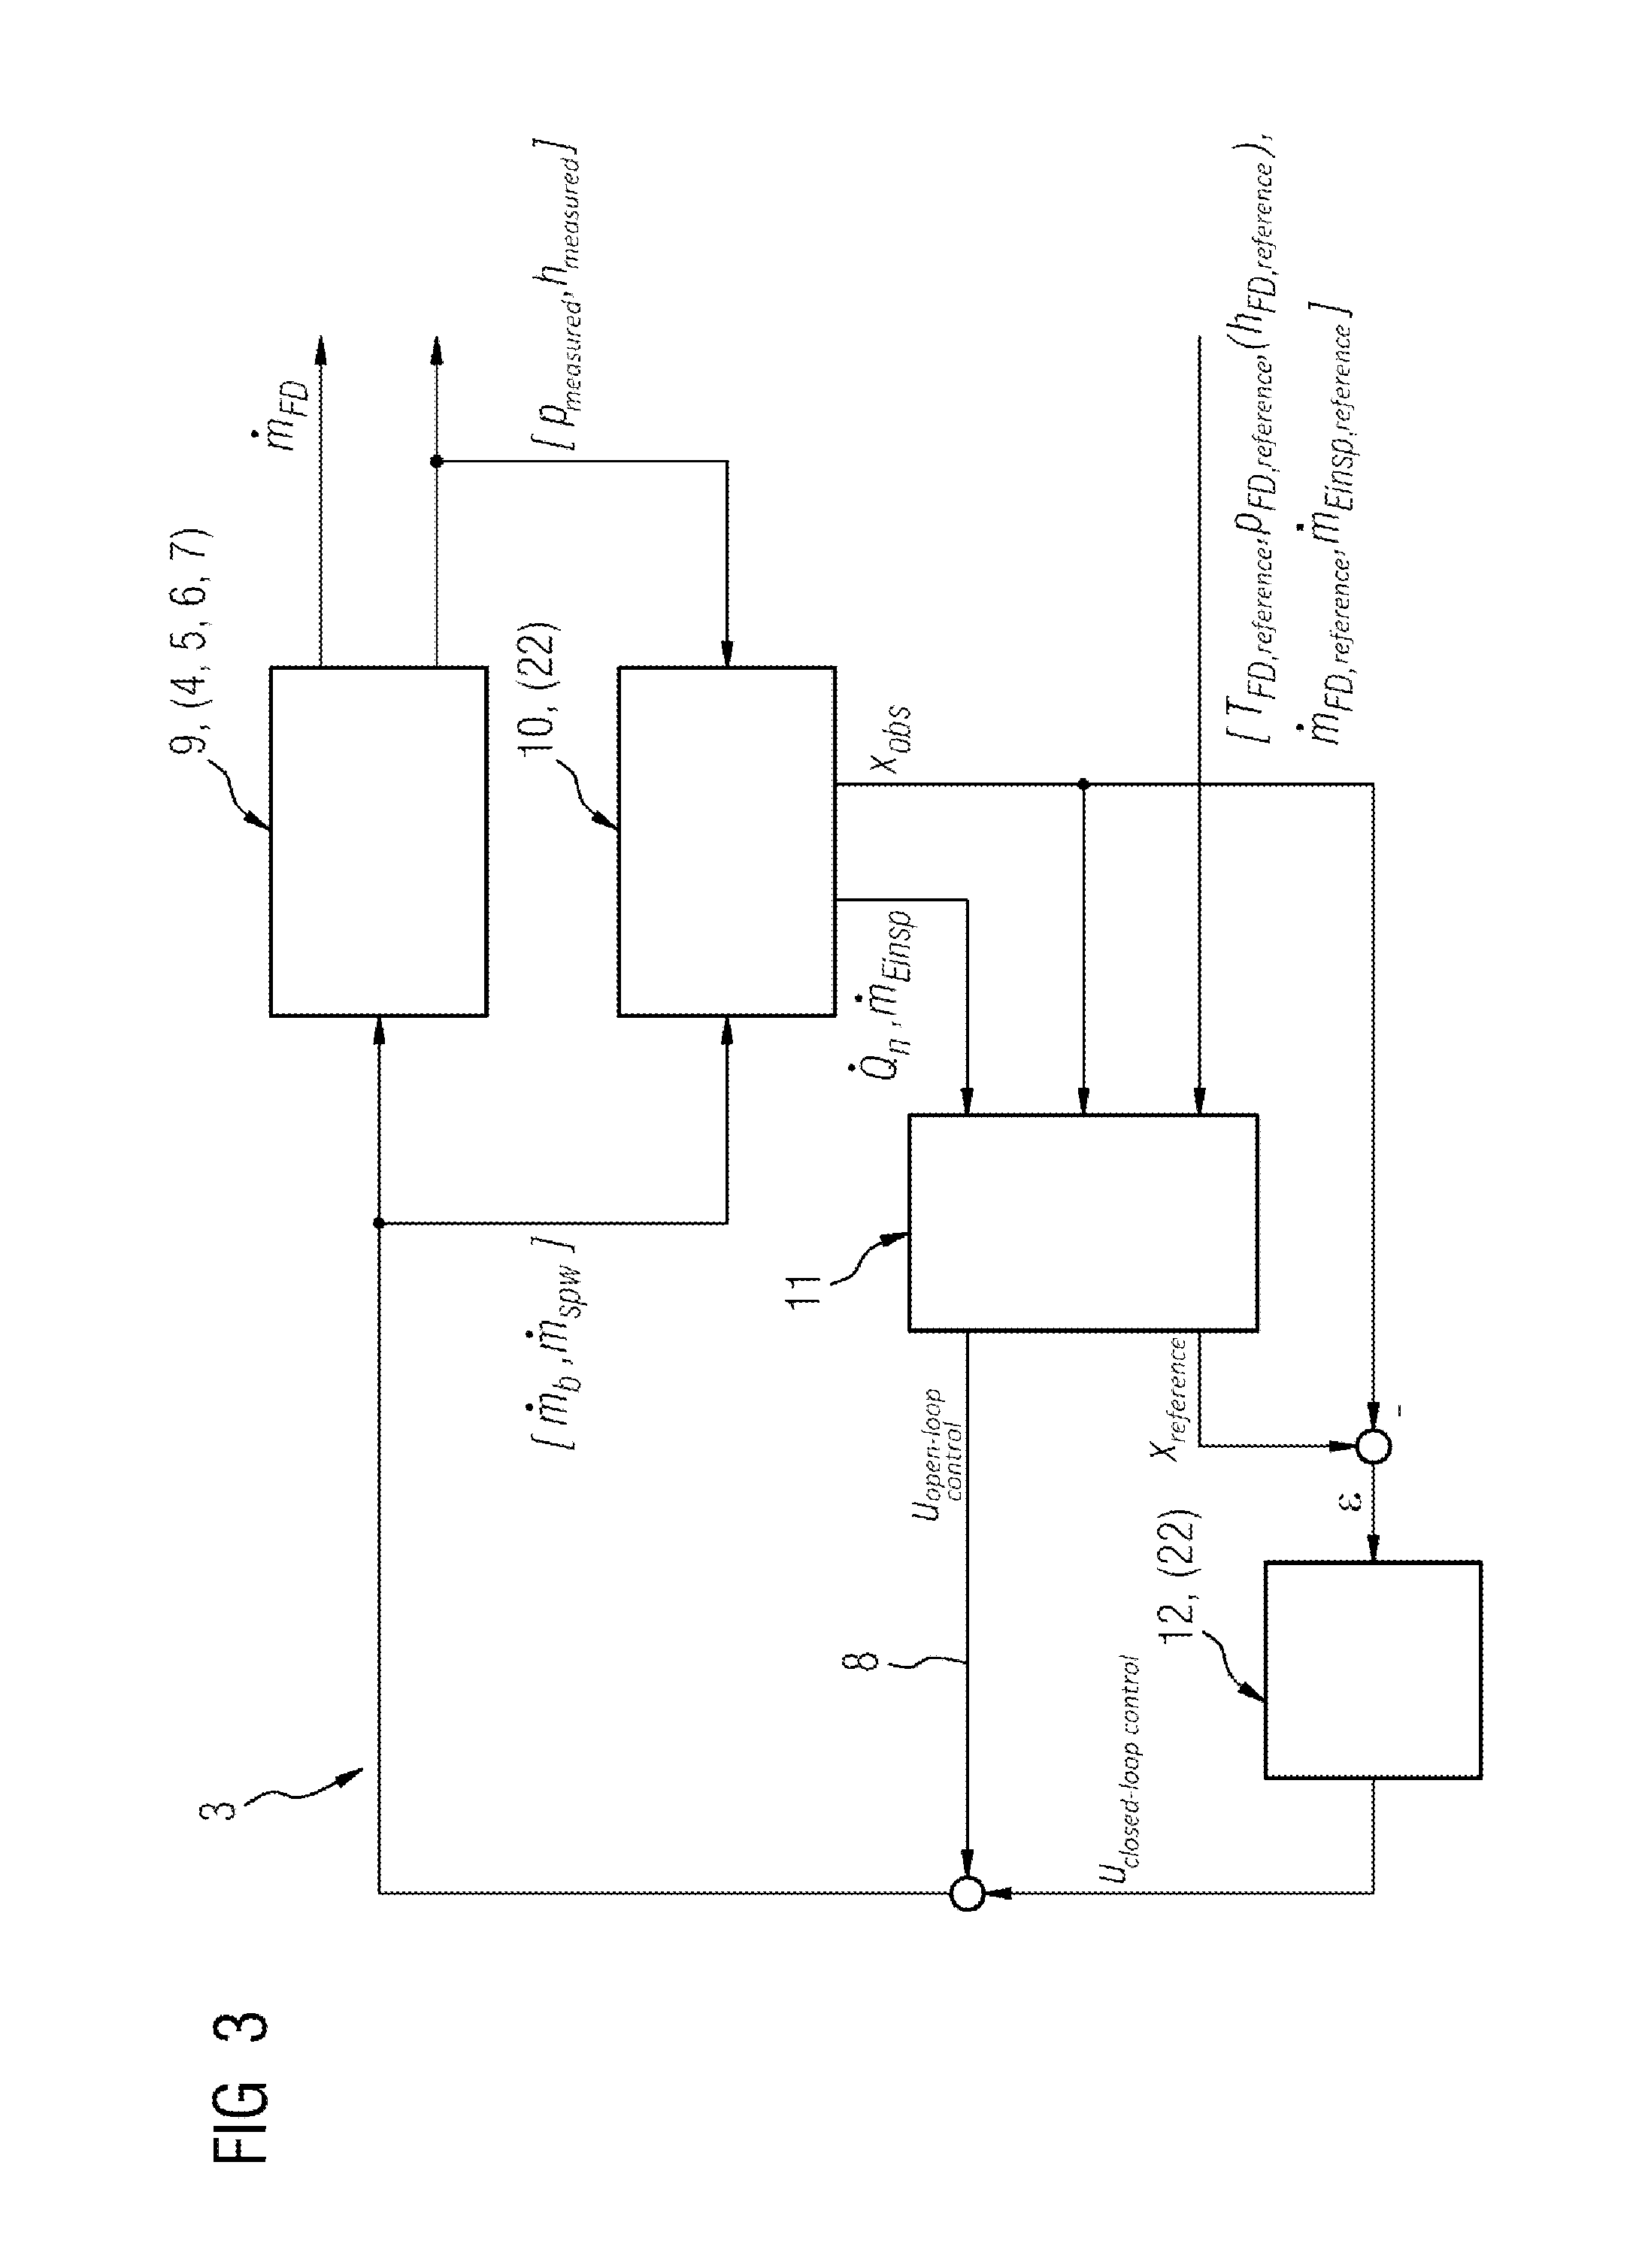 Multi-variable state closed-loop control for a steam generator of a thermal power plant